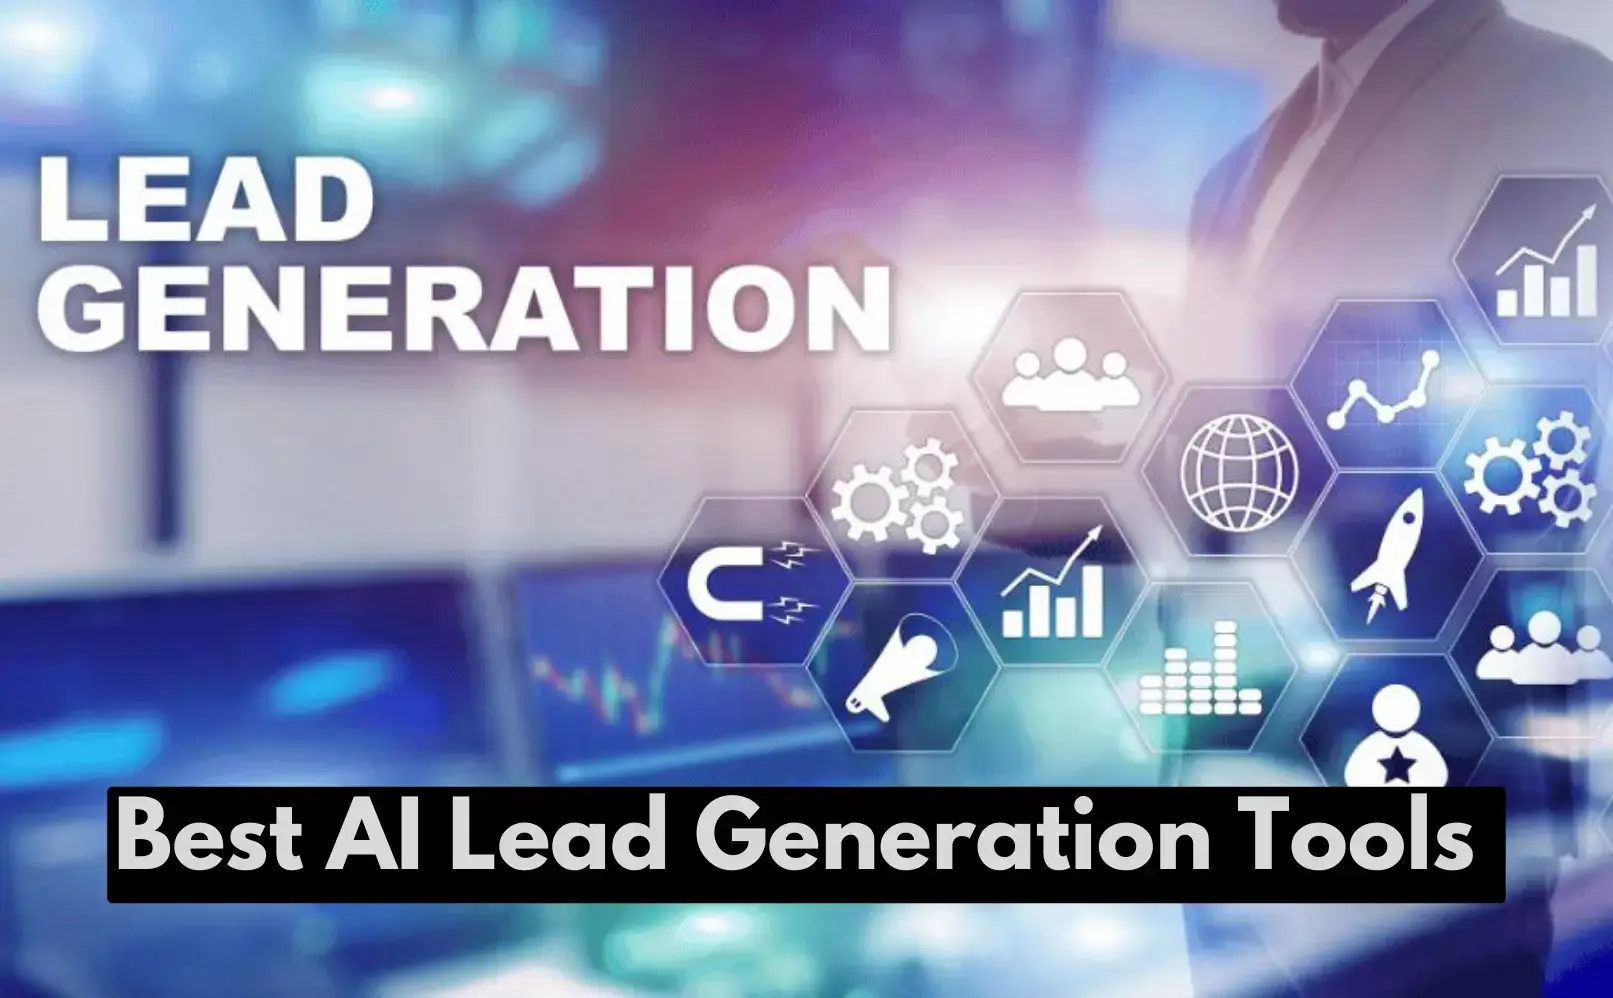 Discover the best AI Lead Generation Tools for high-quality leads. Explore features, reviews, and expert insights to boost your marketing ROI today.